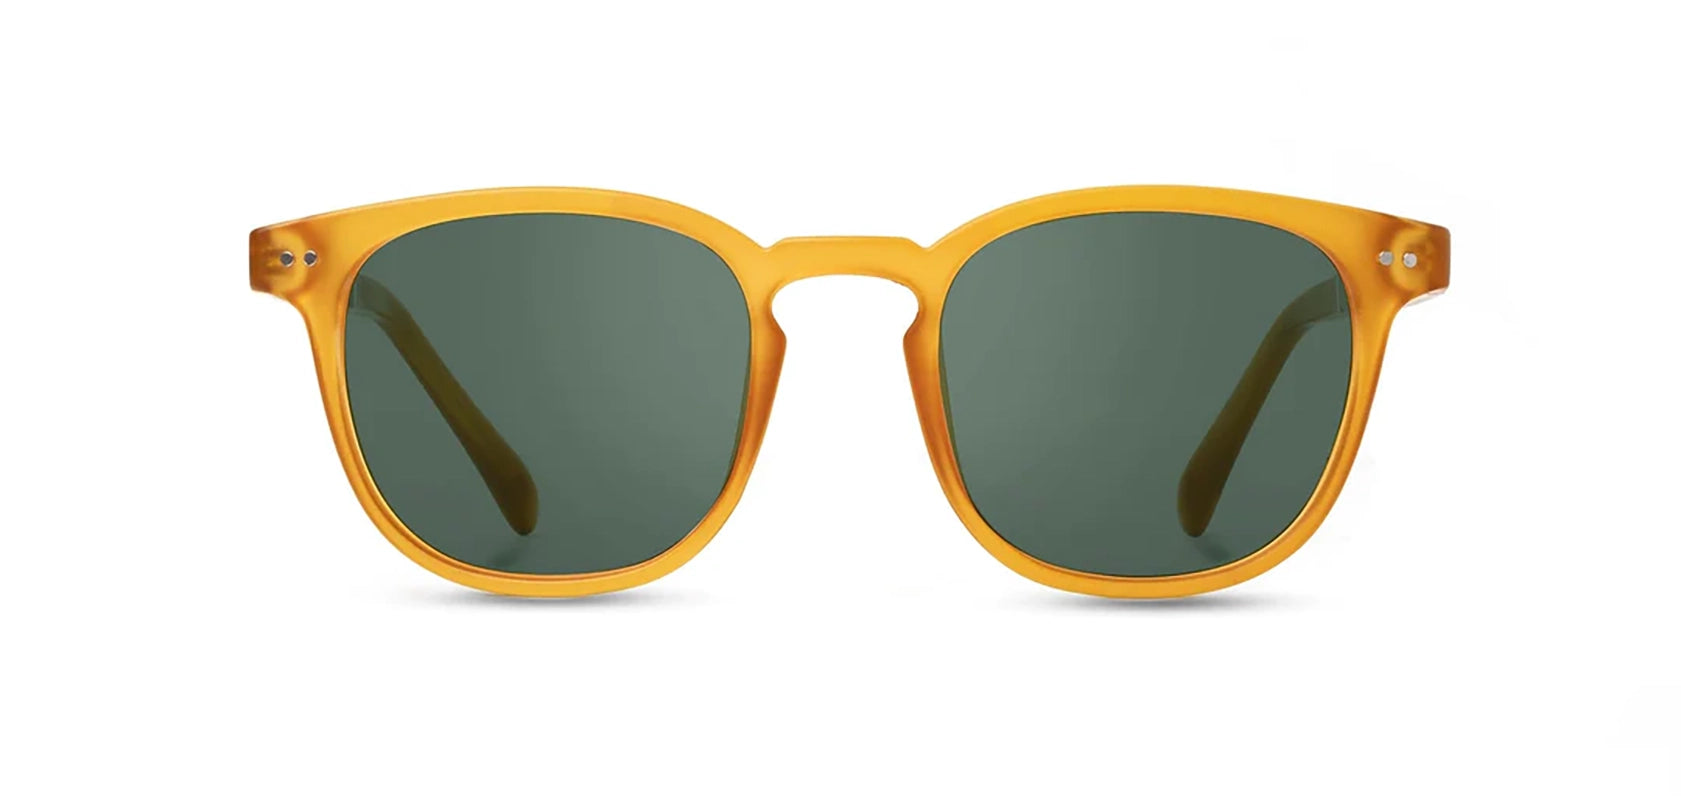 Camp Topo Sunglasses in Matte Orange / Walnut Frames with basic G15 polarized lenses, front view